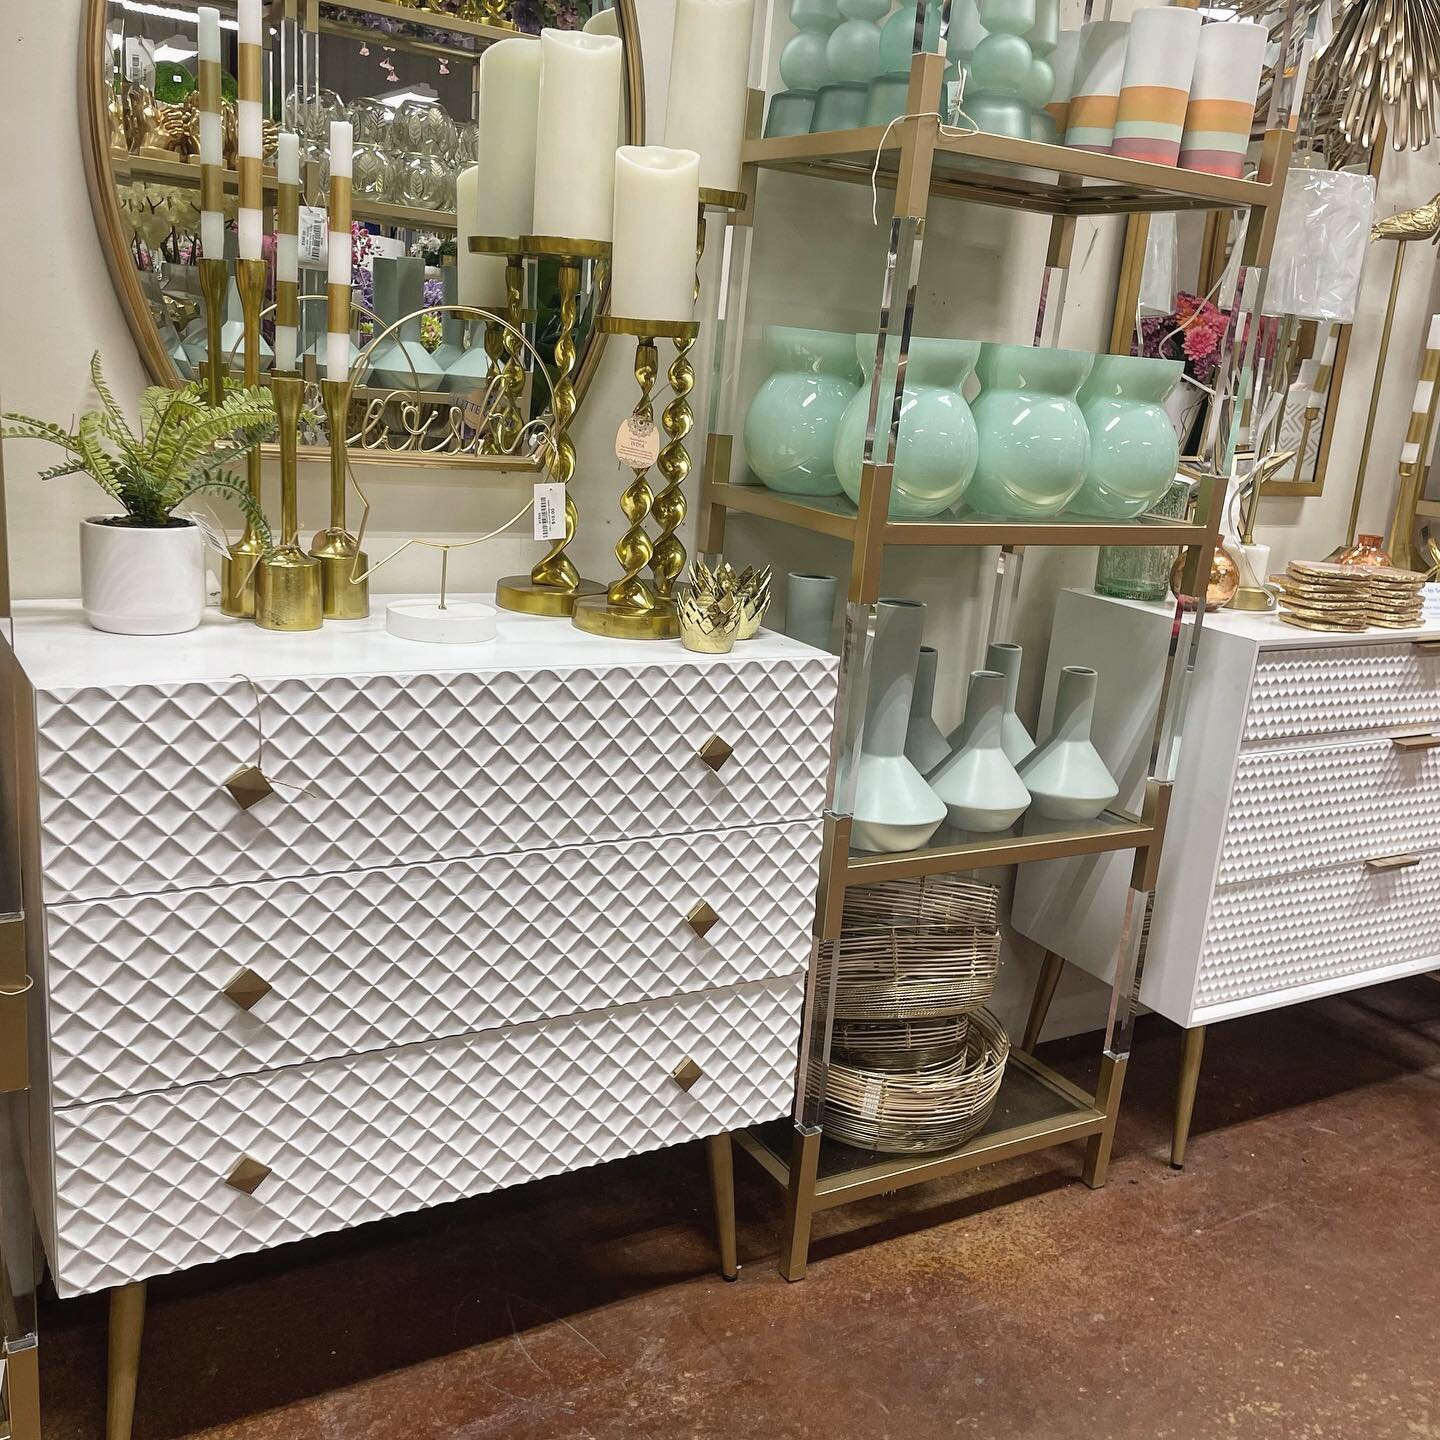 Open until 4:00 today! We are selling out of inventory fast! The Jill Dressers are now low stock! Hurry in or call to purchase before they sell out

Item Details: Jill Dresser, 32H x 32L x 16D, $400